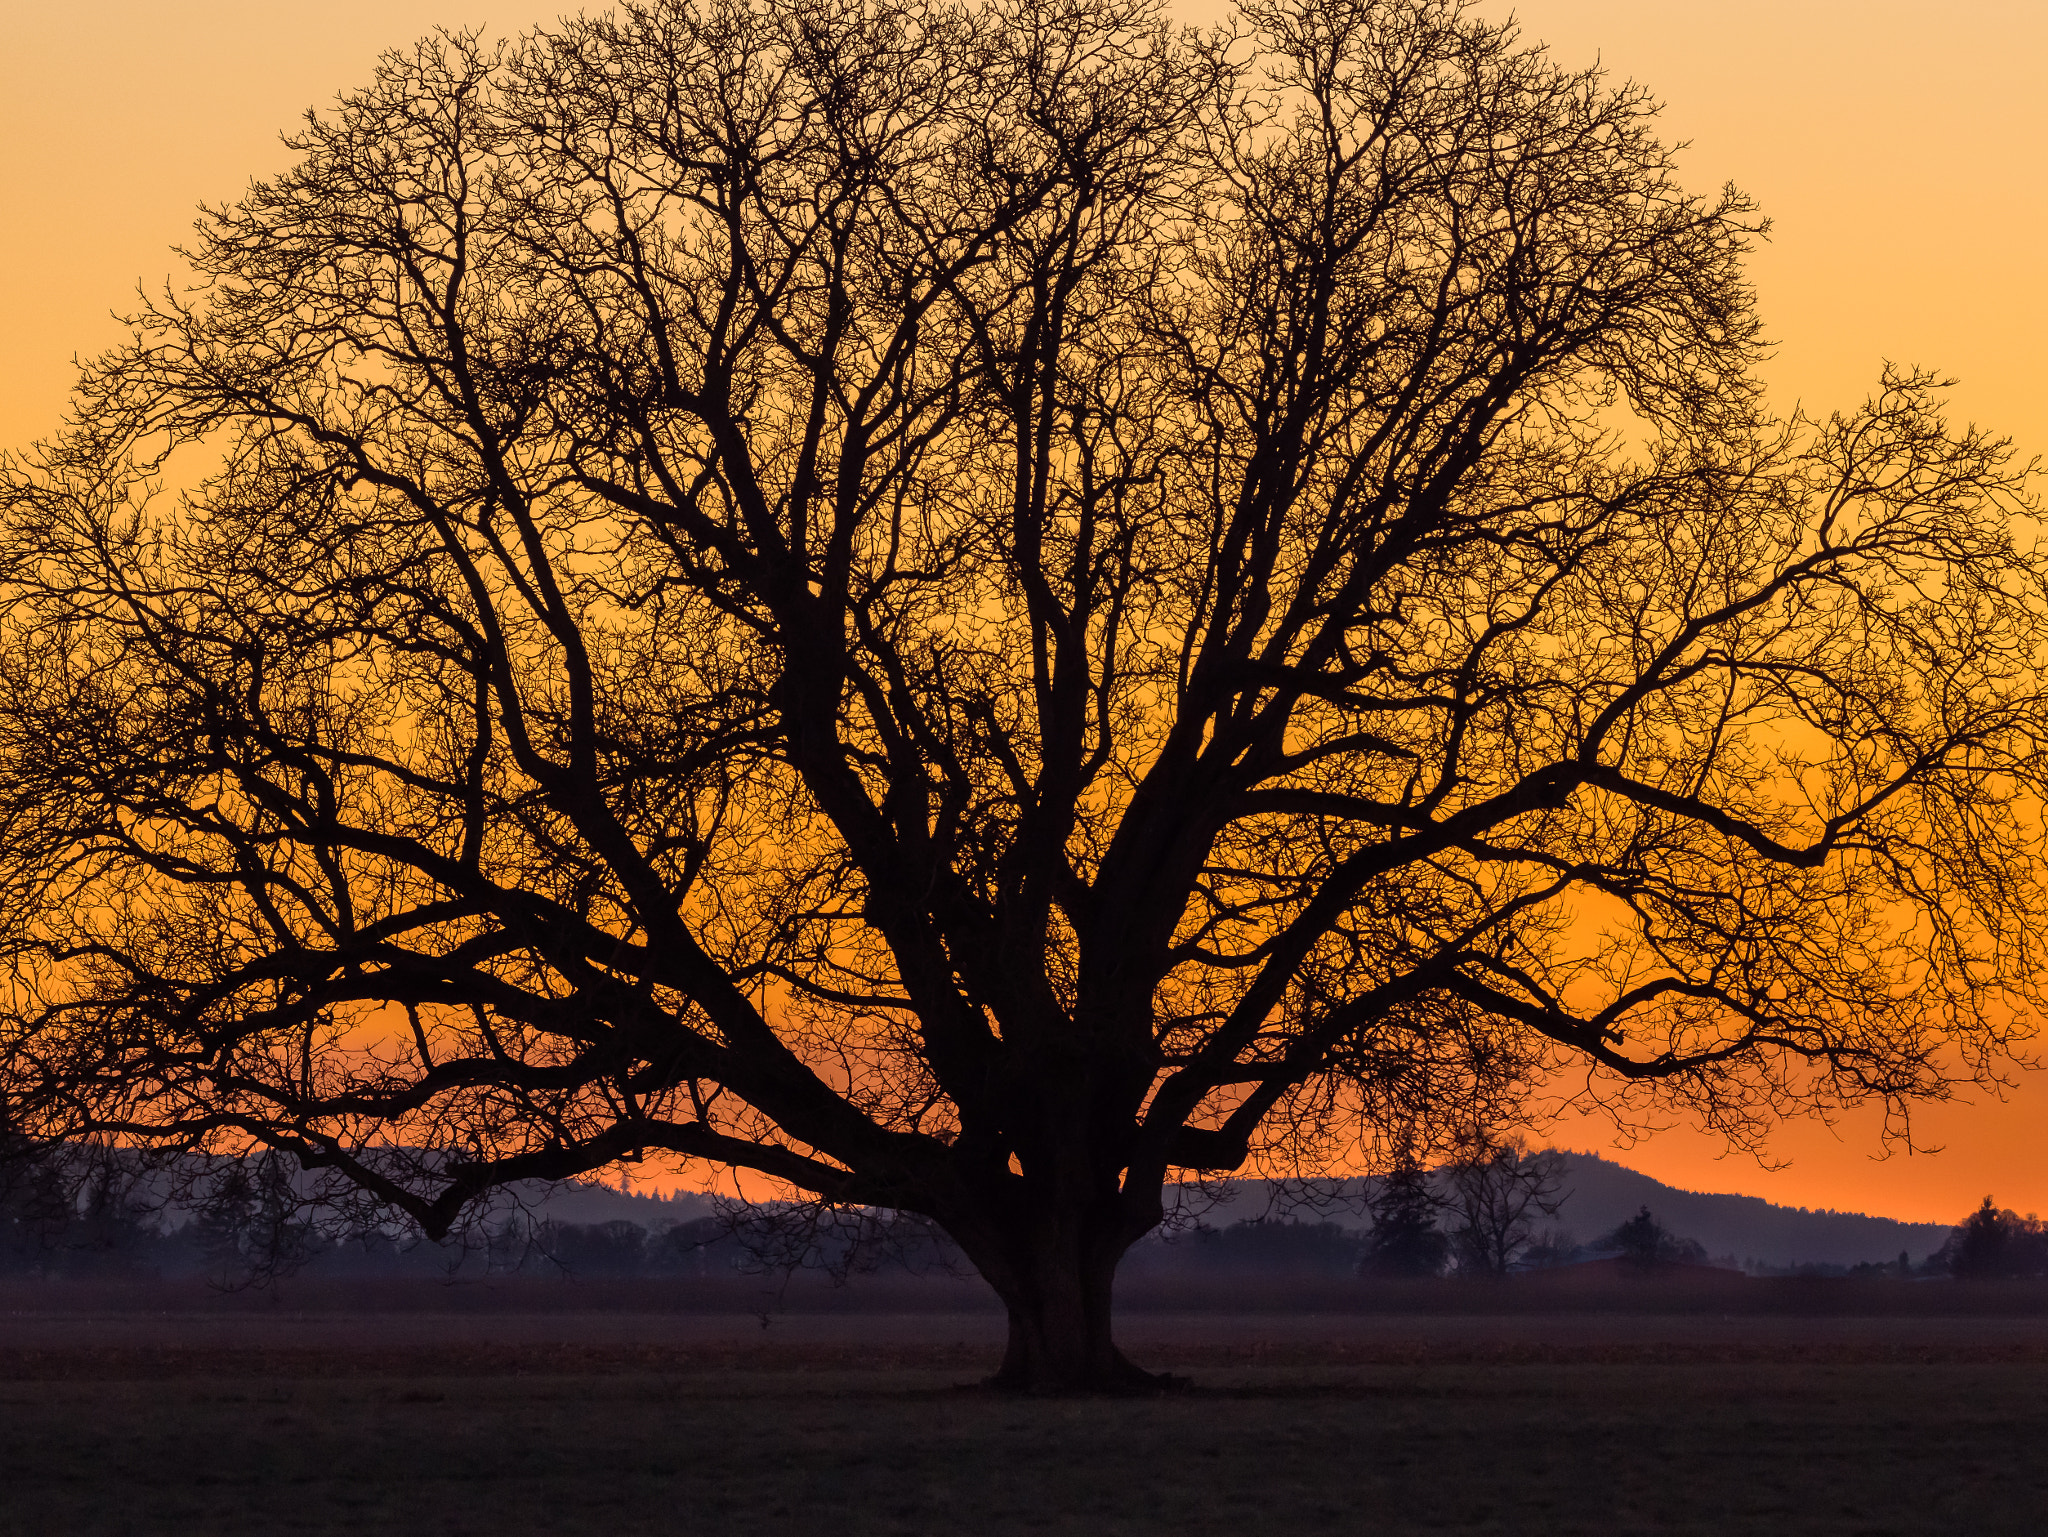 150-600mm F5-6.3 DG OS HSM | Con sample photo. Old oak tree silhouette photography